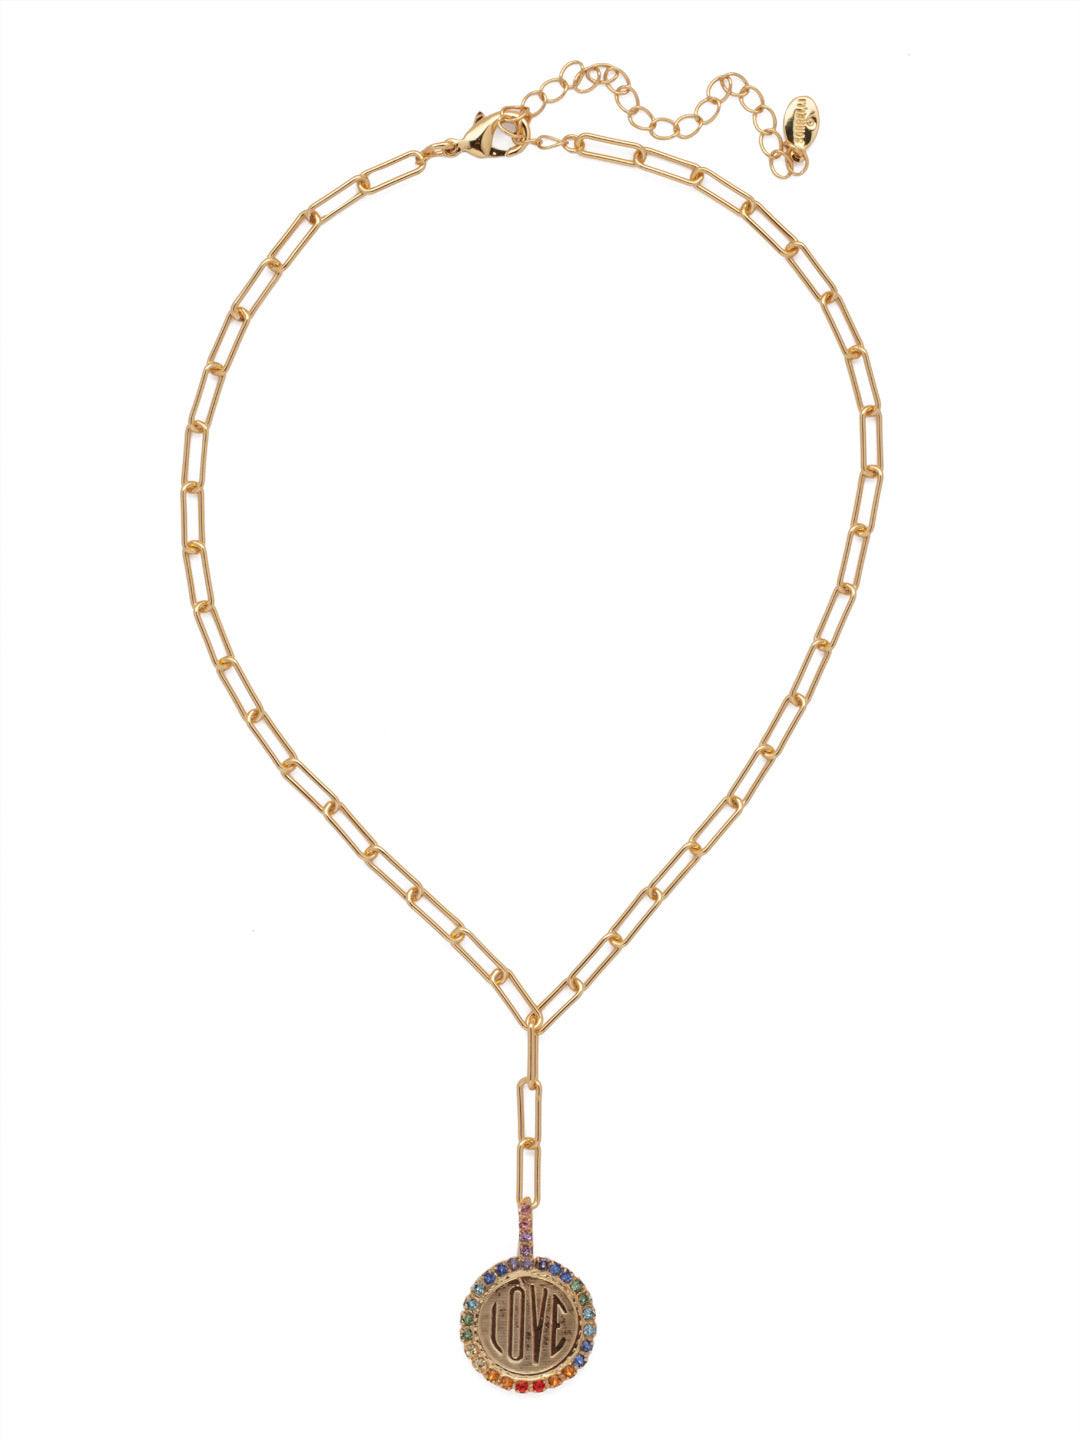 Luvie Pendant Necklace - NFA1BGPRI - <p>The Luvie Pendant Necklace features a paperclip chain hanging in a lariat style, with a single love script coin at the bottom. The lobster claw clasp secures the adjustable chain to various lengths. From Sorrelli's Prism collection in our Bright Gold-tone finish.</p>